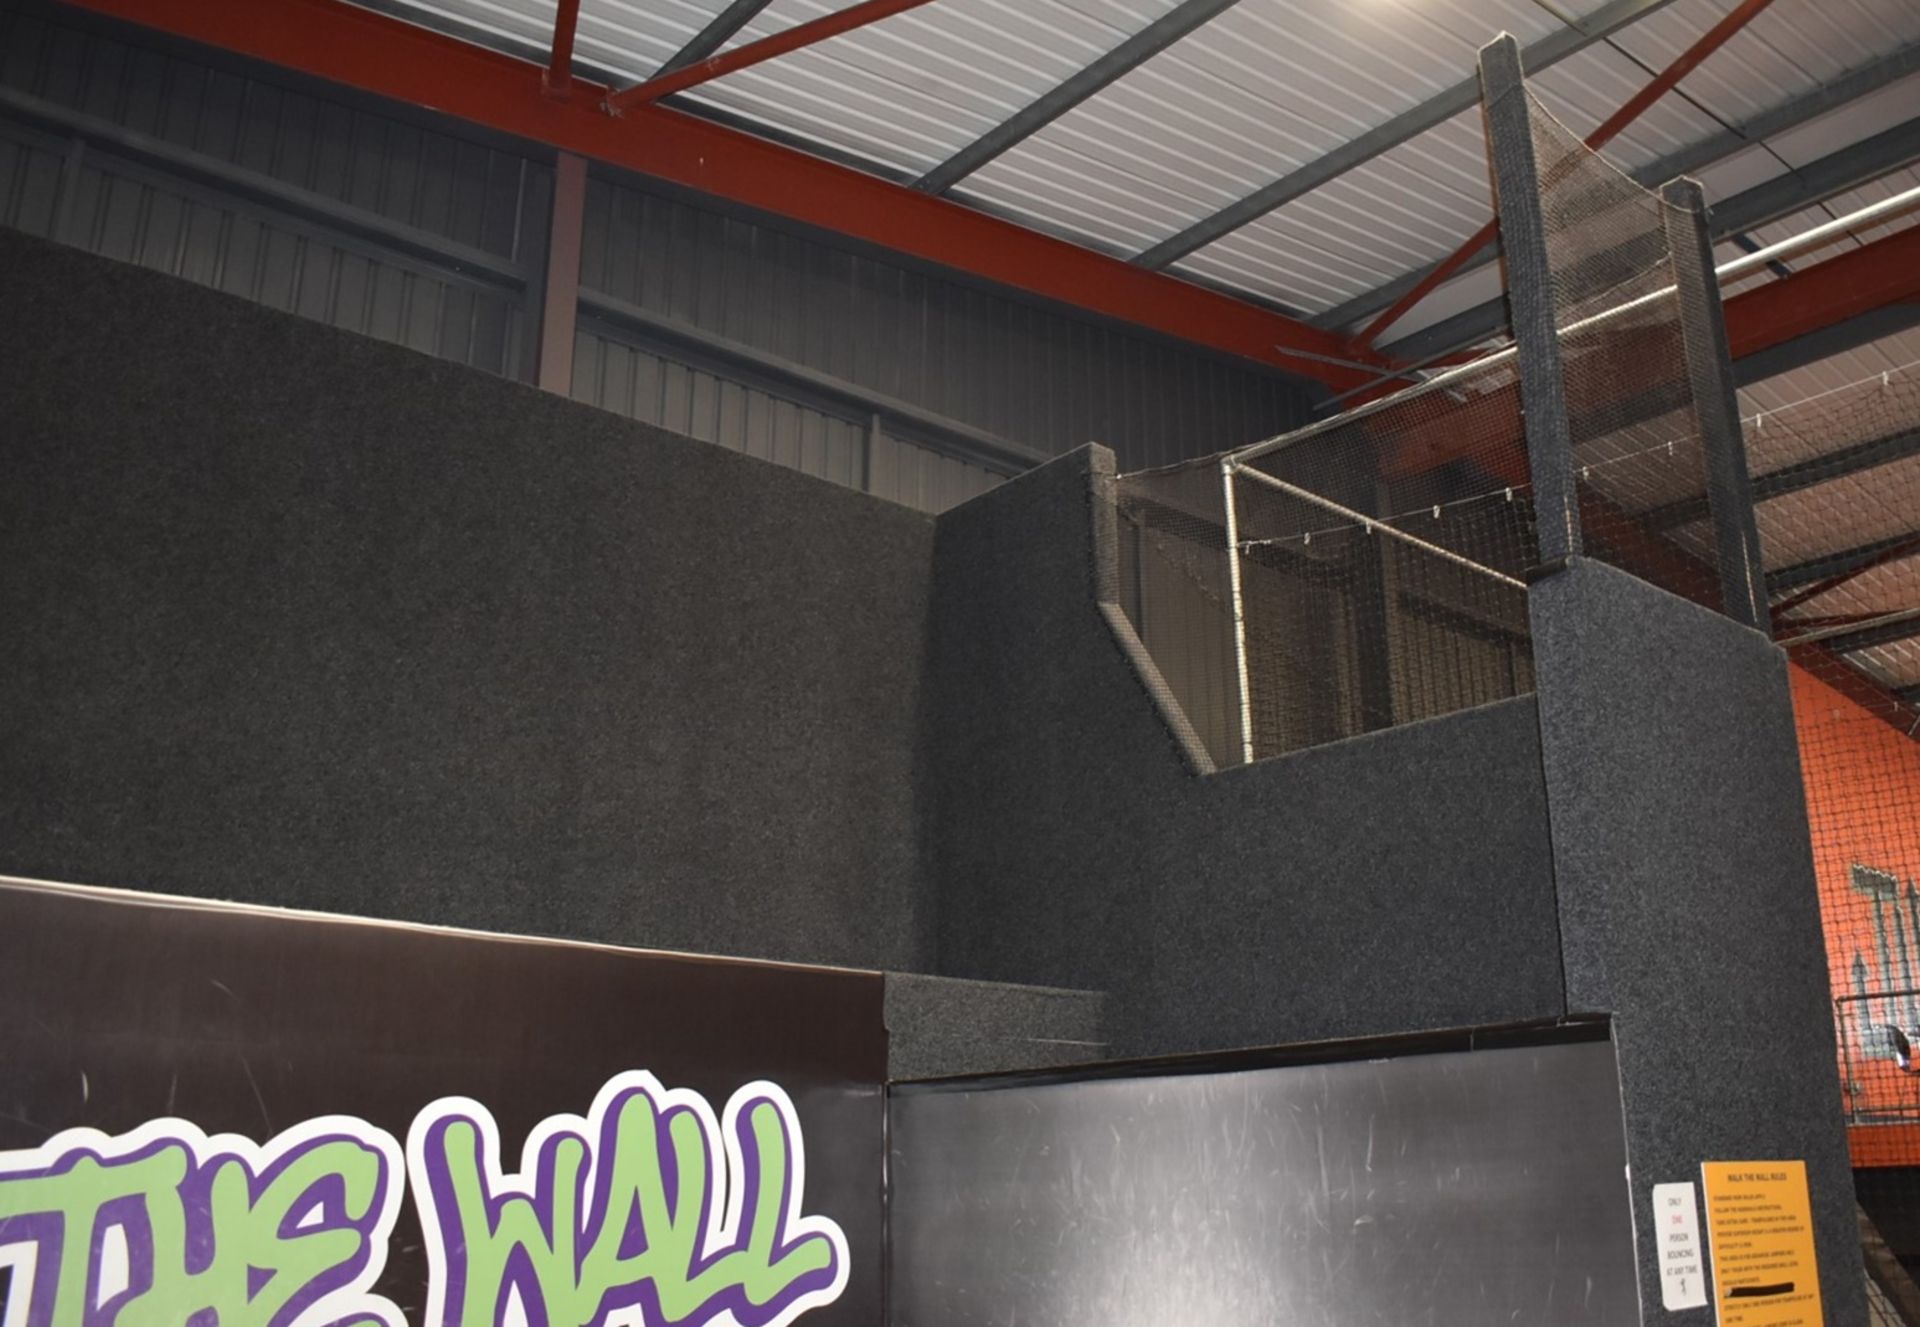 1 x Large Trampoline Park - Disassembled - Includes Dodgeball Arena And Jump Tower - CL766  - - Image 38 of 99